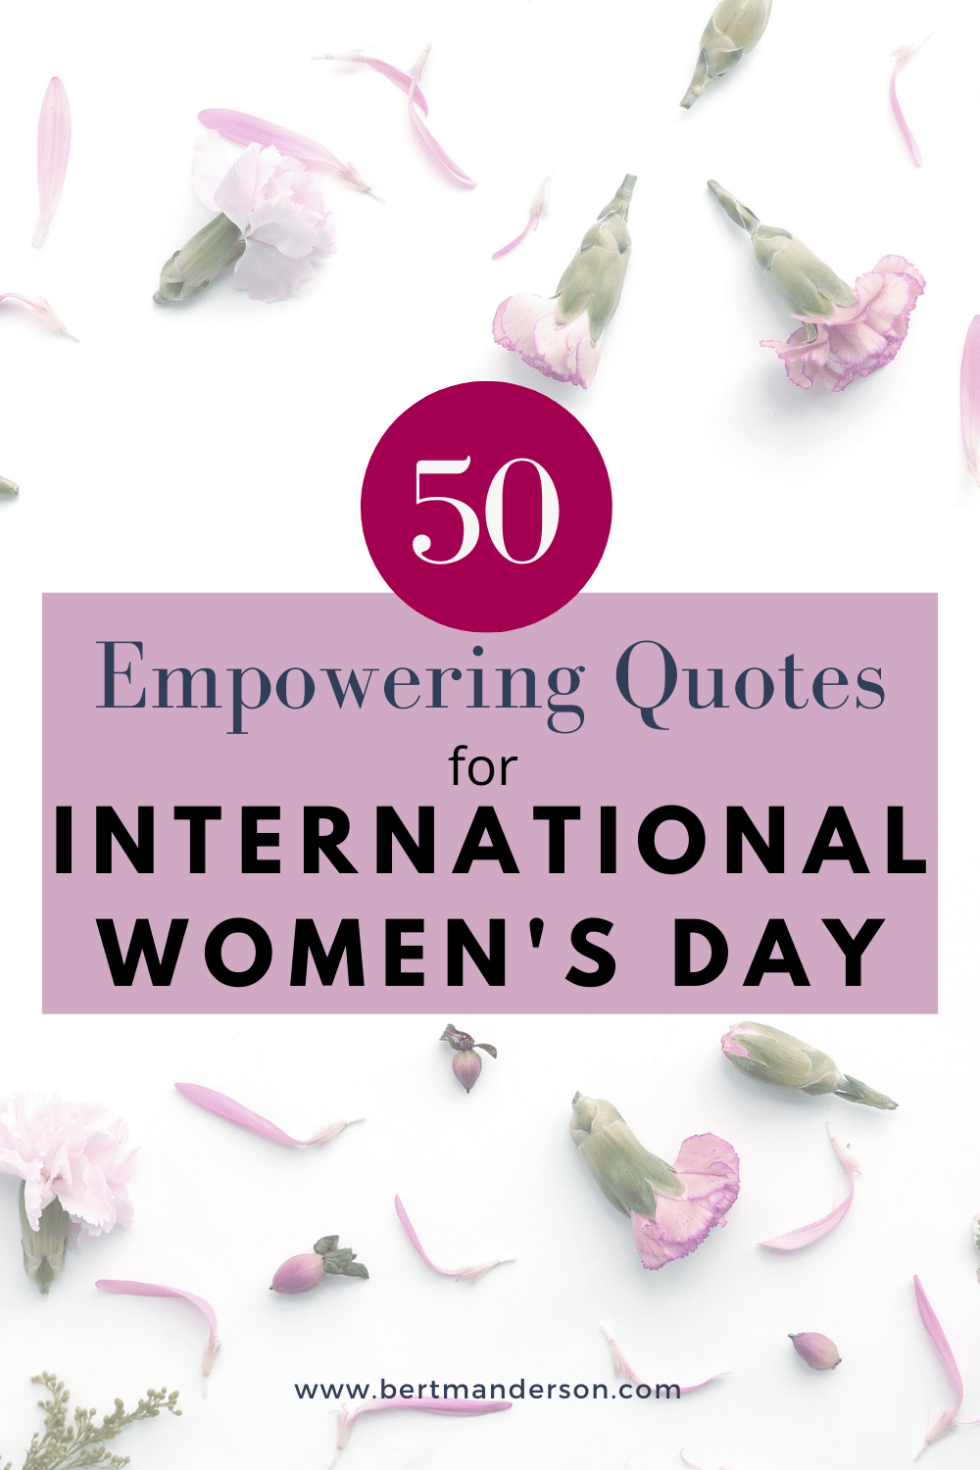 50 Inspiring Quotes for International Women's Day